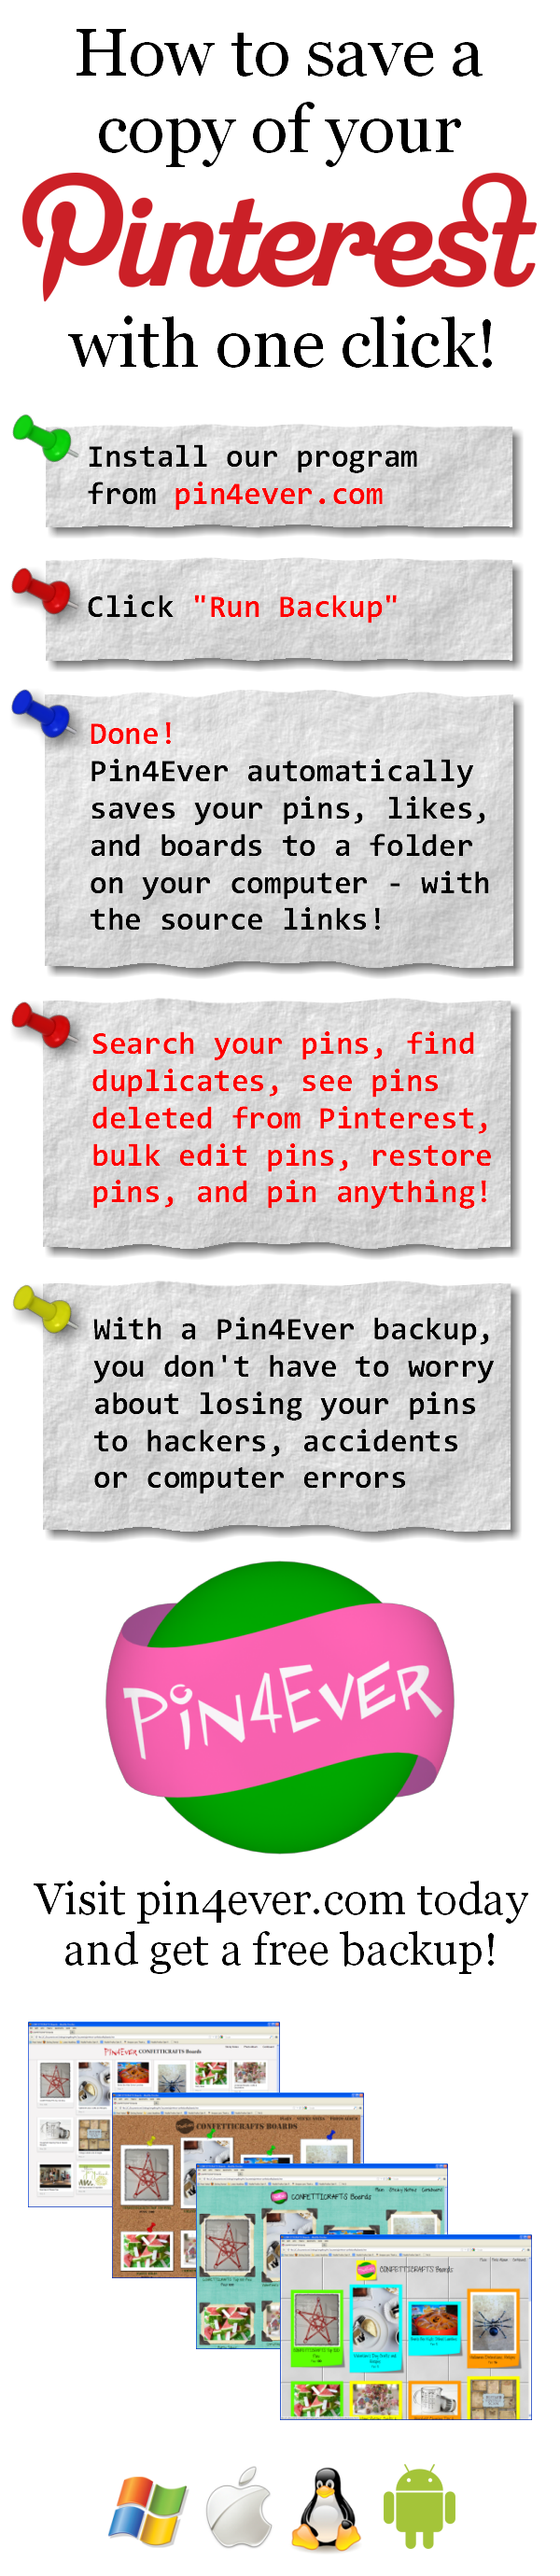 Are your pins protected? Pin4Ever has saved, edited or uploaded 474,427,958 pins since September 2012. Go to pin4ever.com and try it free!